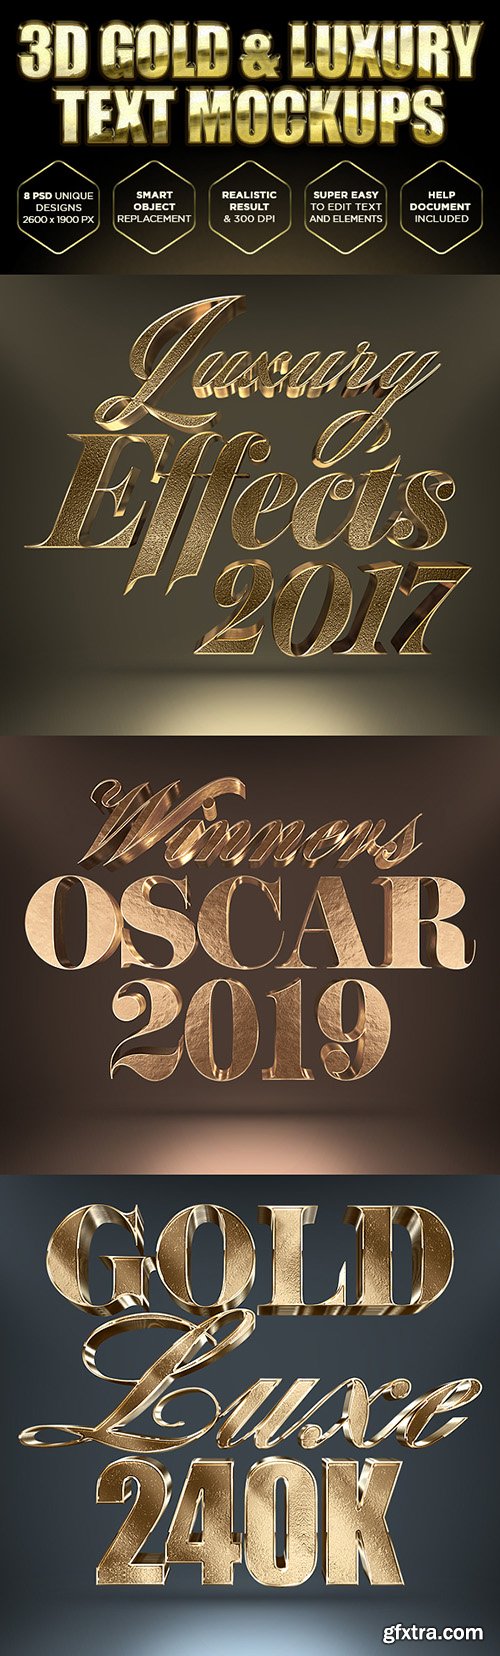 Graphicriver 3D Gold Text Mockups 19531284